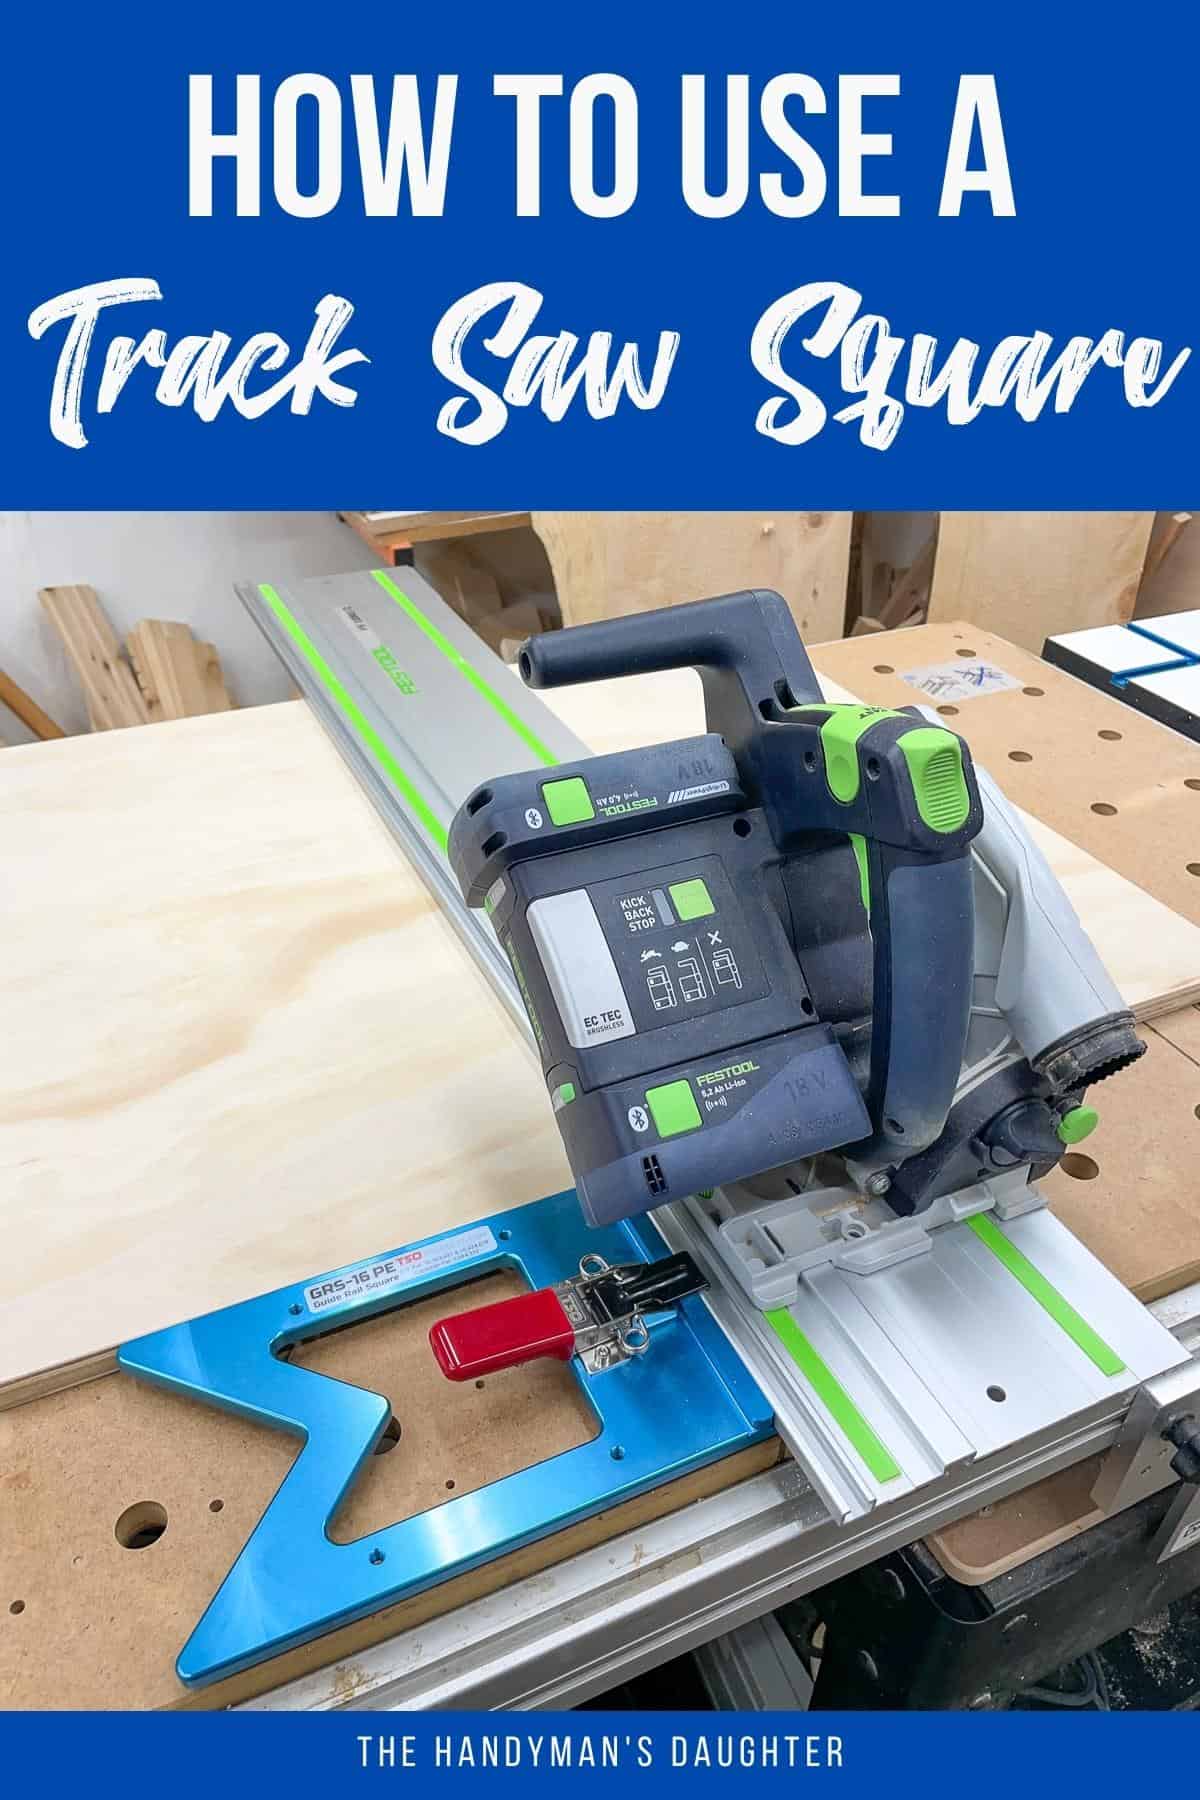 How to Use a Track Saw Square